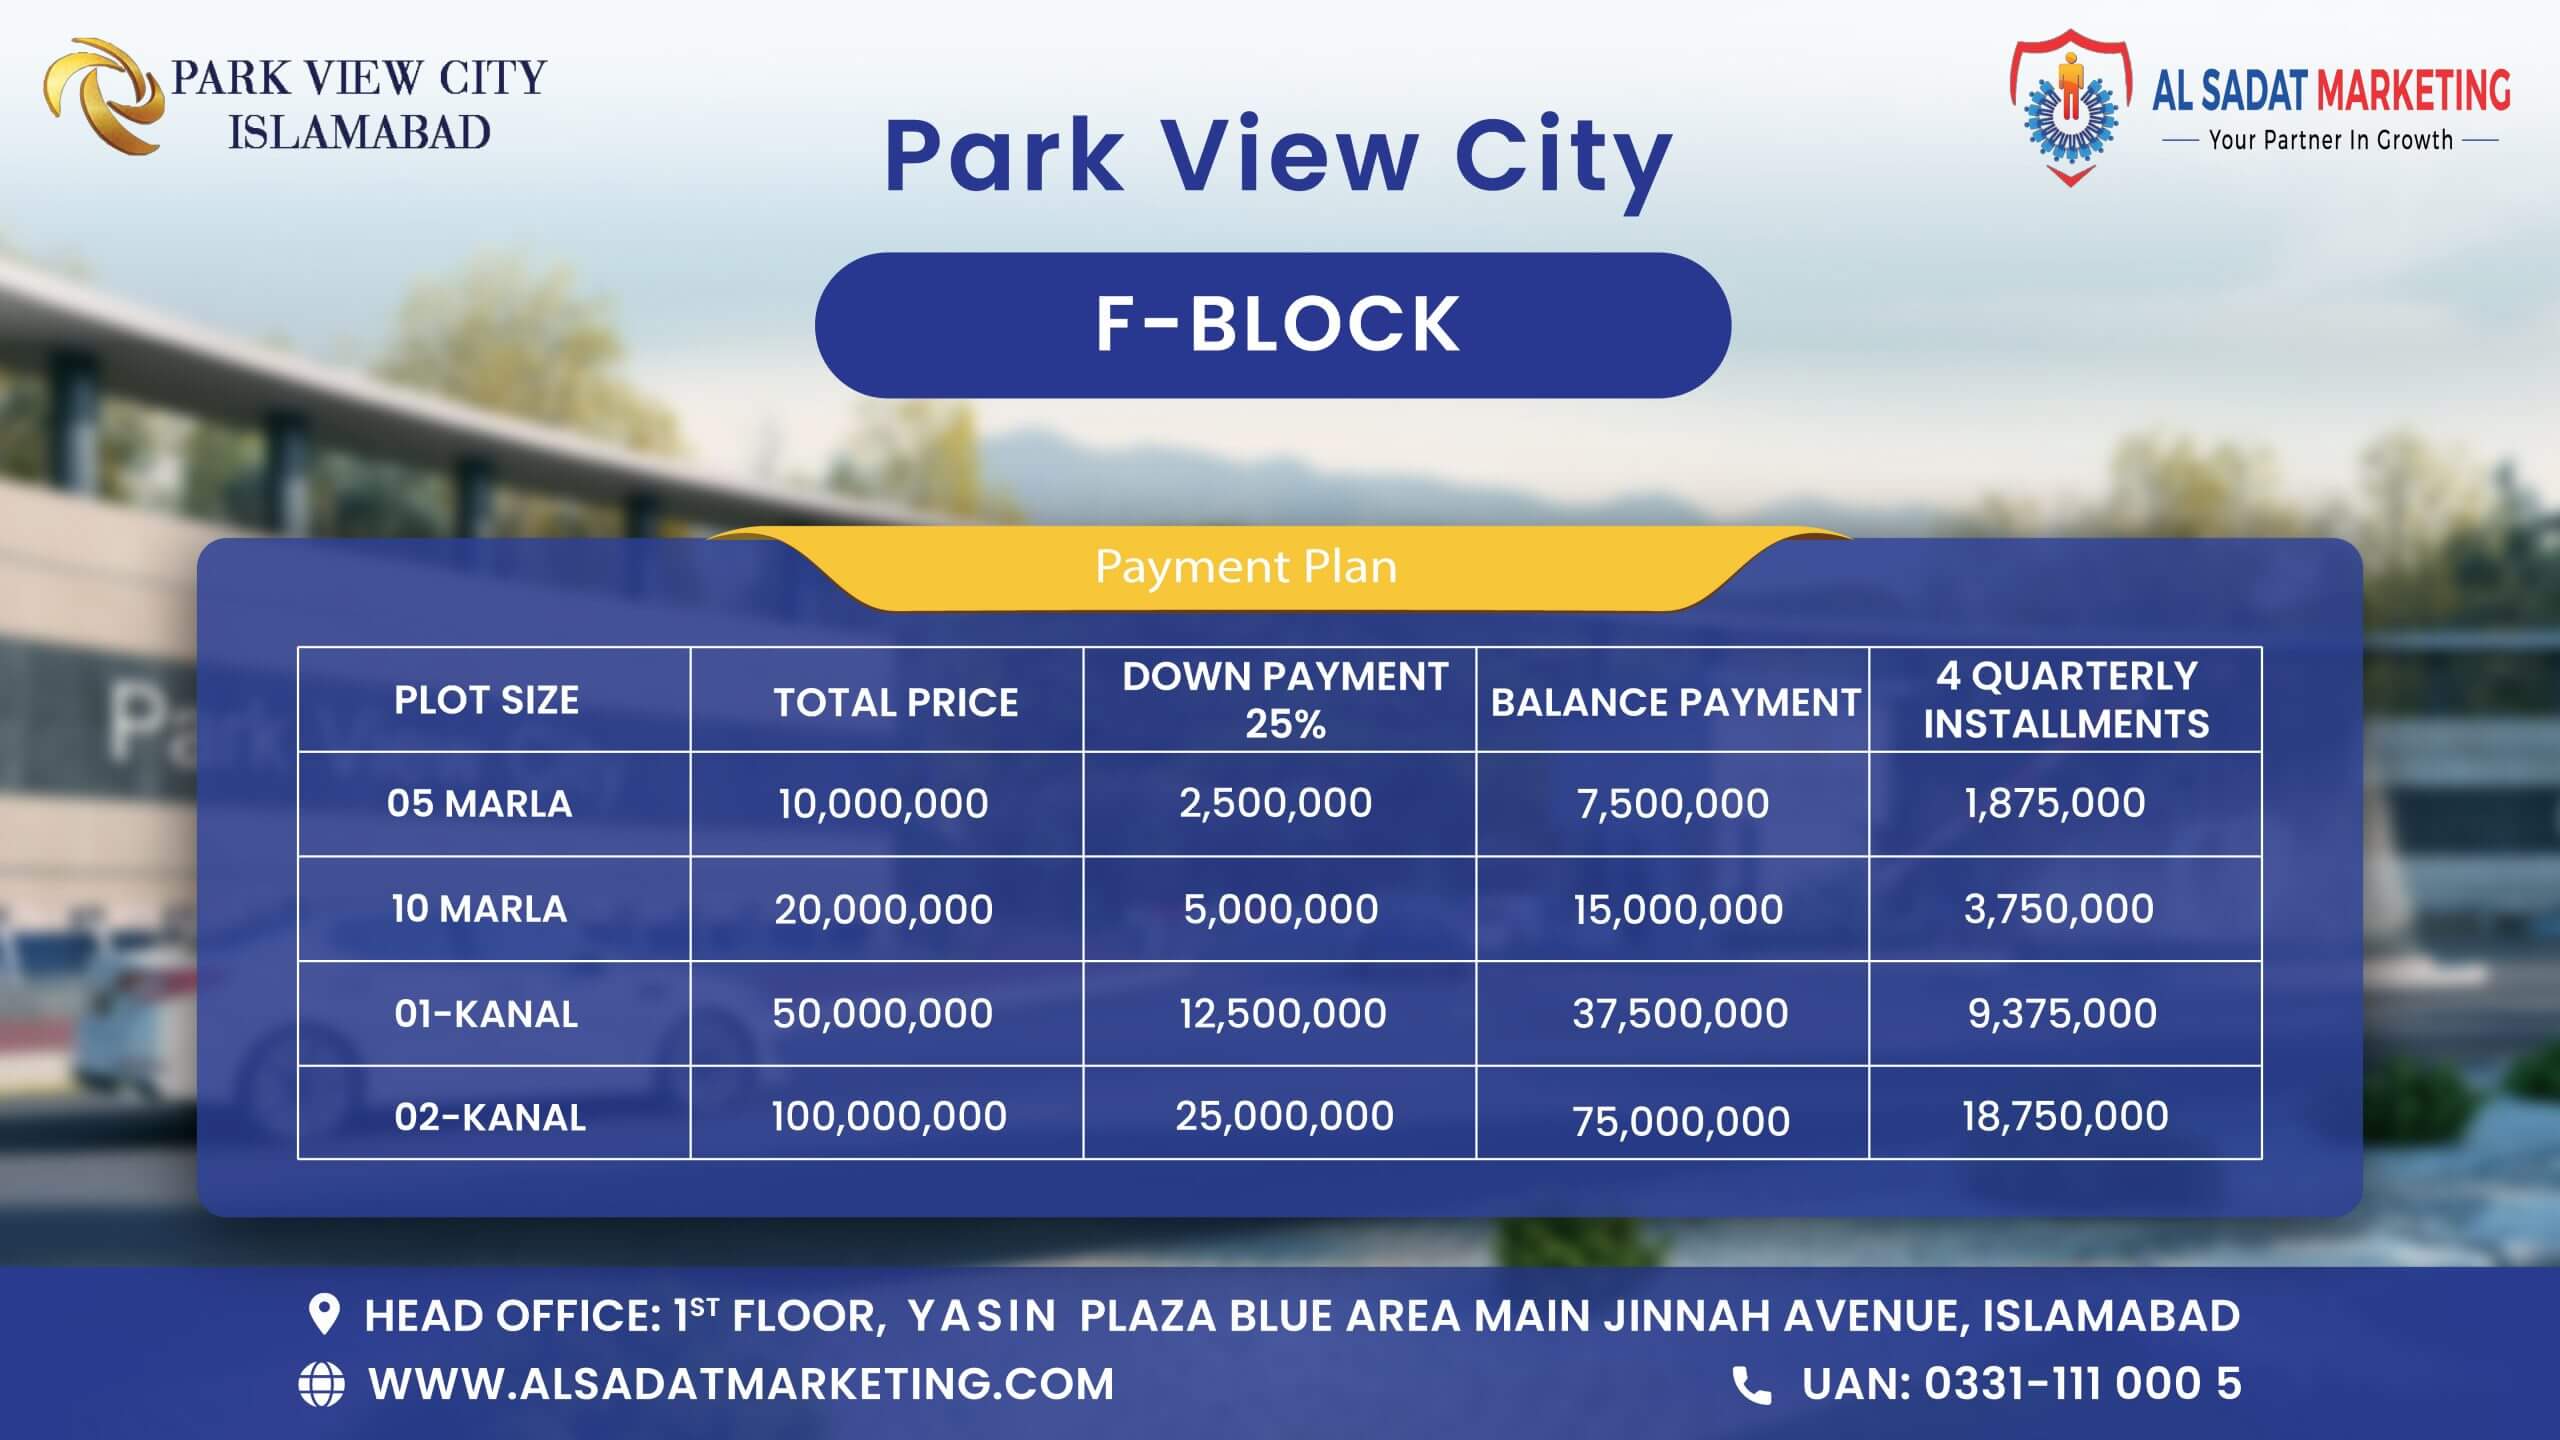 park view city islamabad f block payment plan - park view city f block payment plan - park view city islamabad payment plan - park view city payment plan - payment plan of park view city islamabad – payment plan of park view city – park view city islamabad – park view city – park view city housing society - park view city islamabad housing society – park view city real estate project - park view city islamabad real estate project - al sadat marketing - alsadat marketing - al-sadat marketing